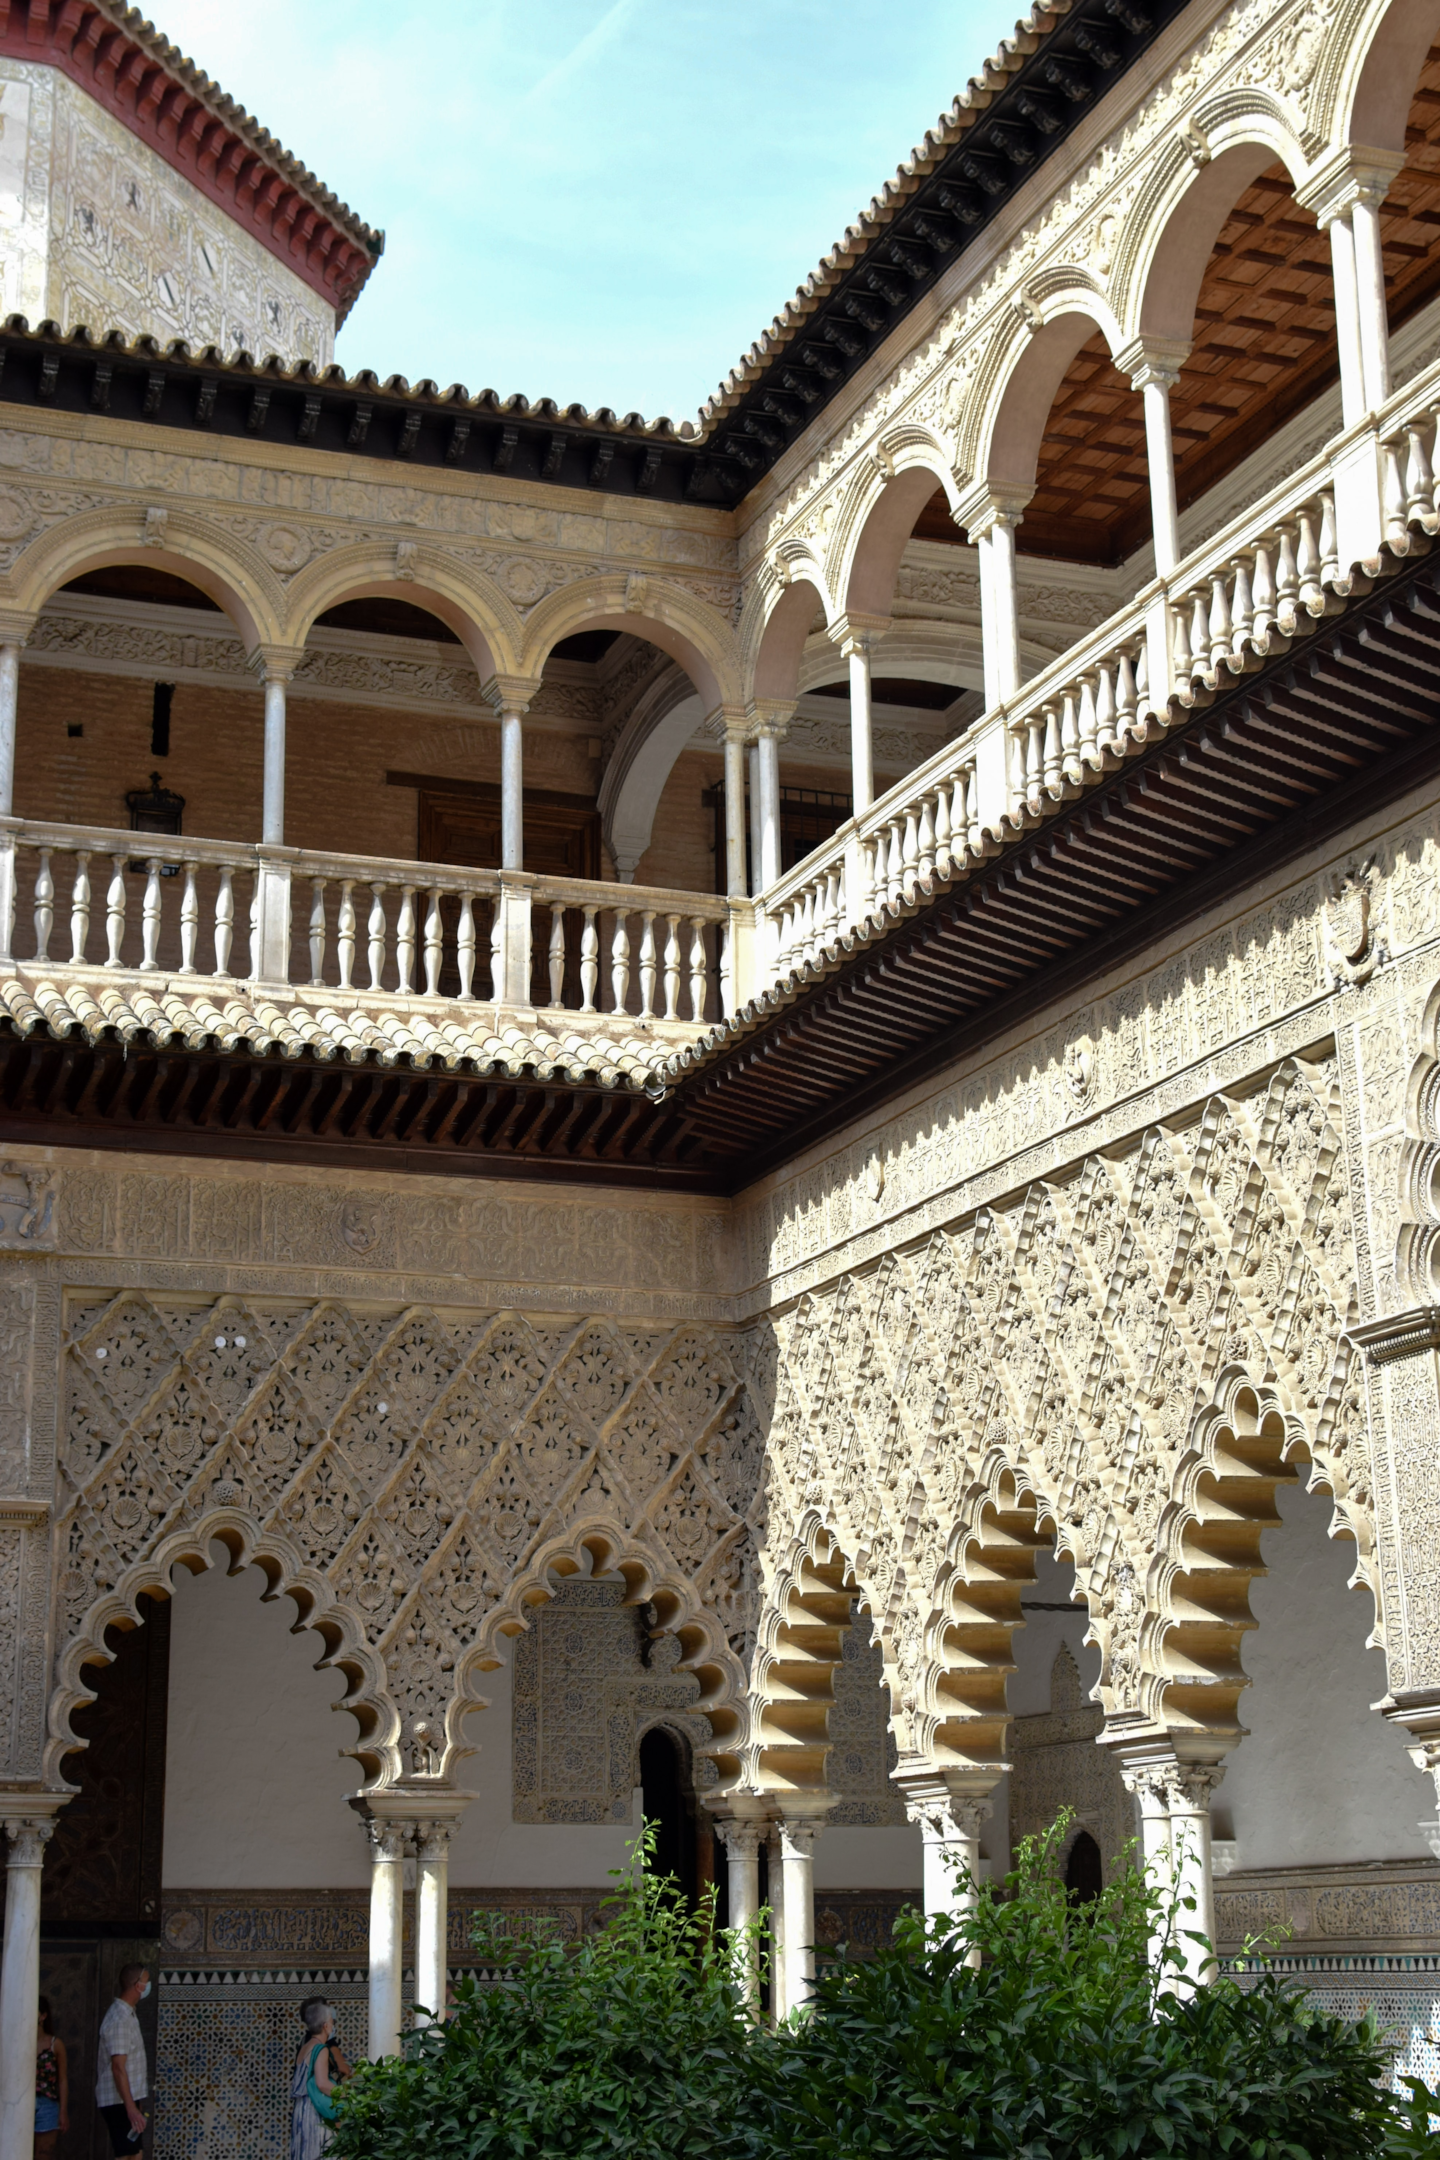 Game of Thrones Filming Location: Real Alcázar Palace